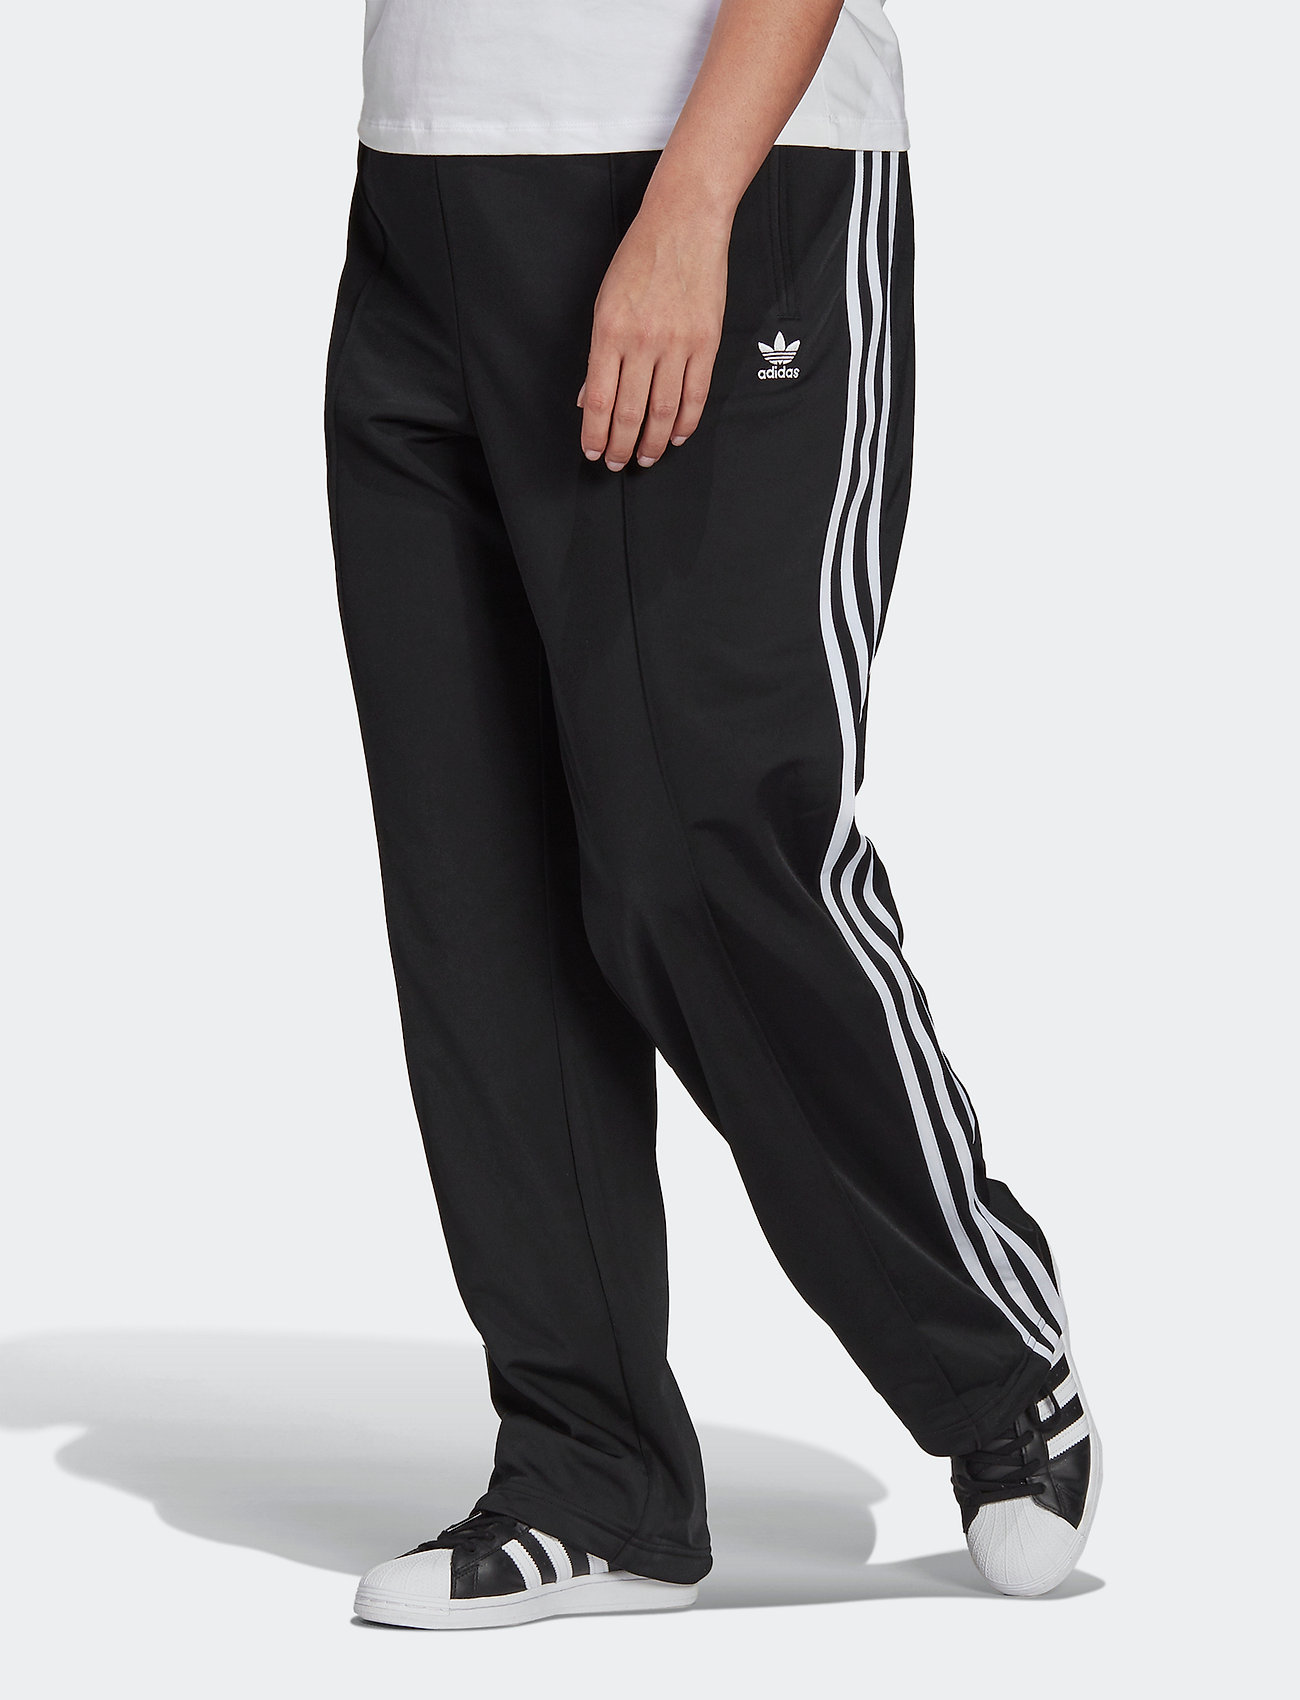 Details 86+ adidas synthetic track pants - in.eteachers